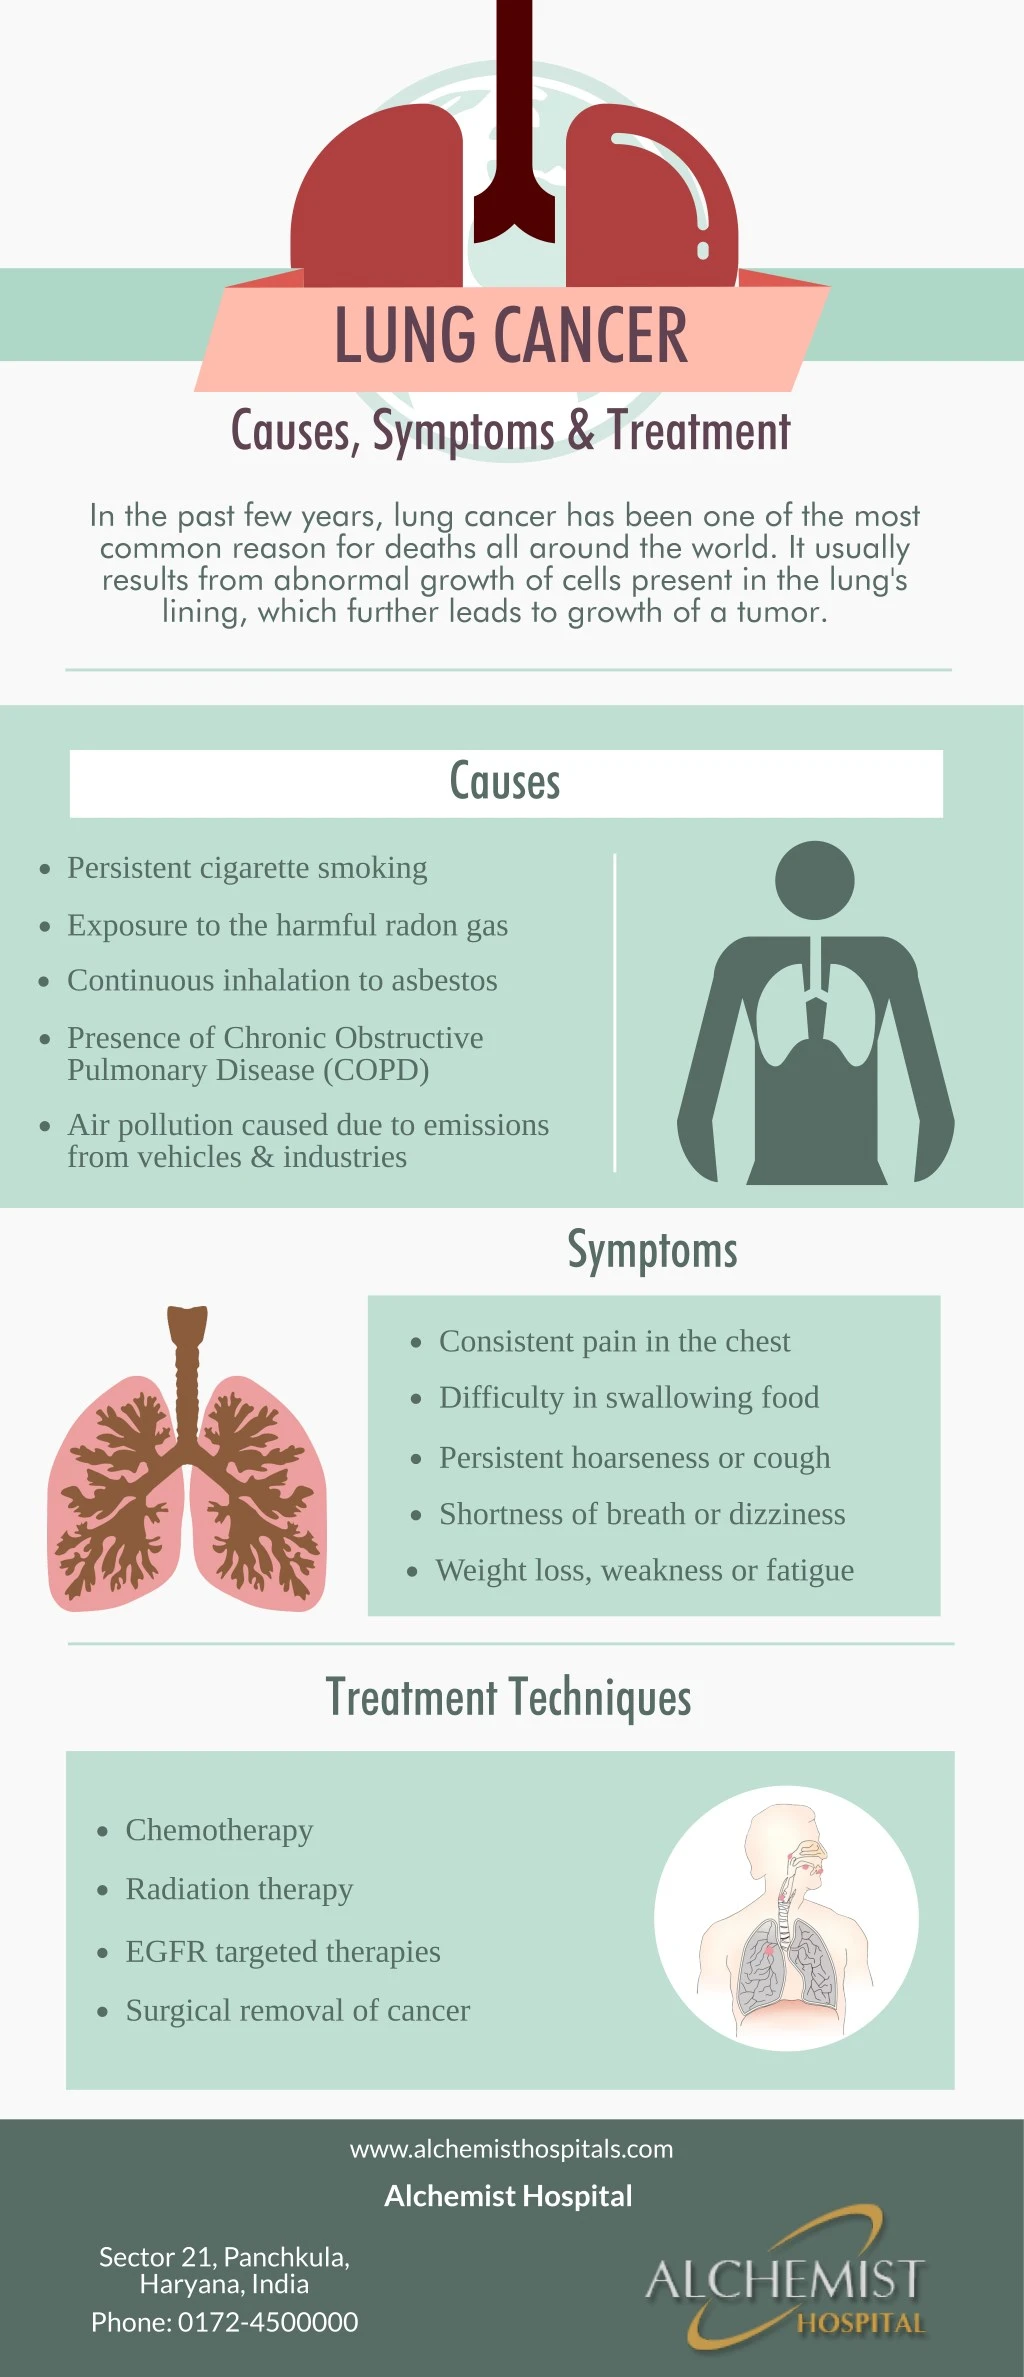 Ppt Lung Cancer Causes Symptoms And Treatment Powerpoint Presentation 8218